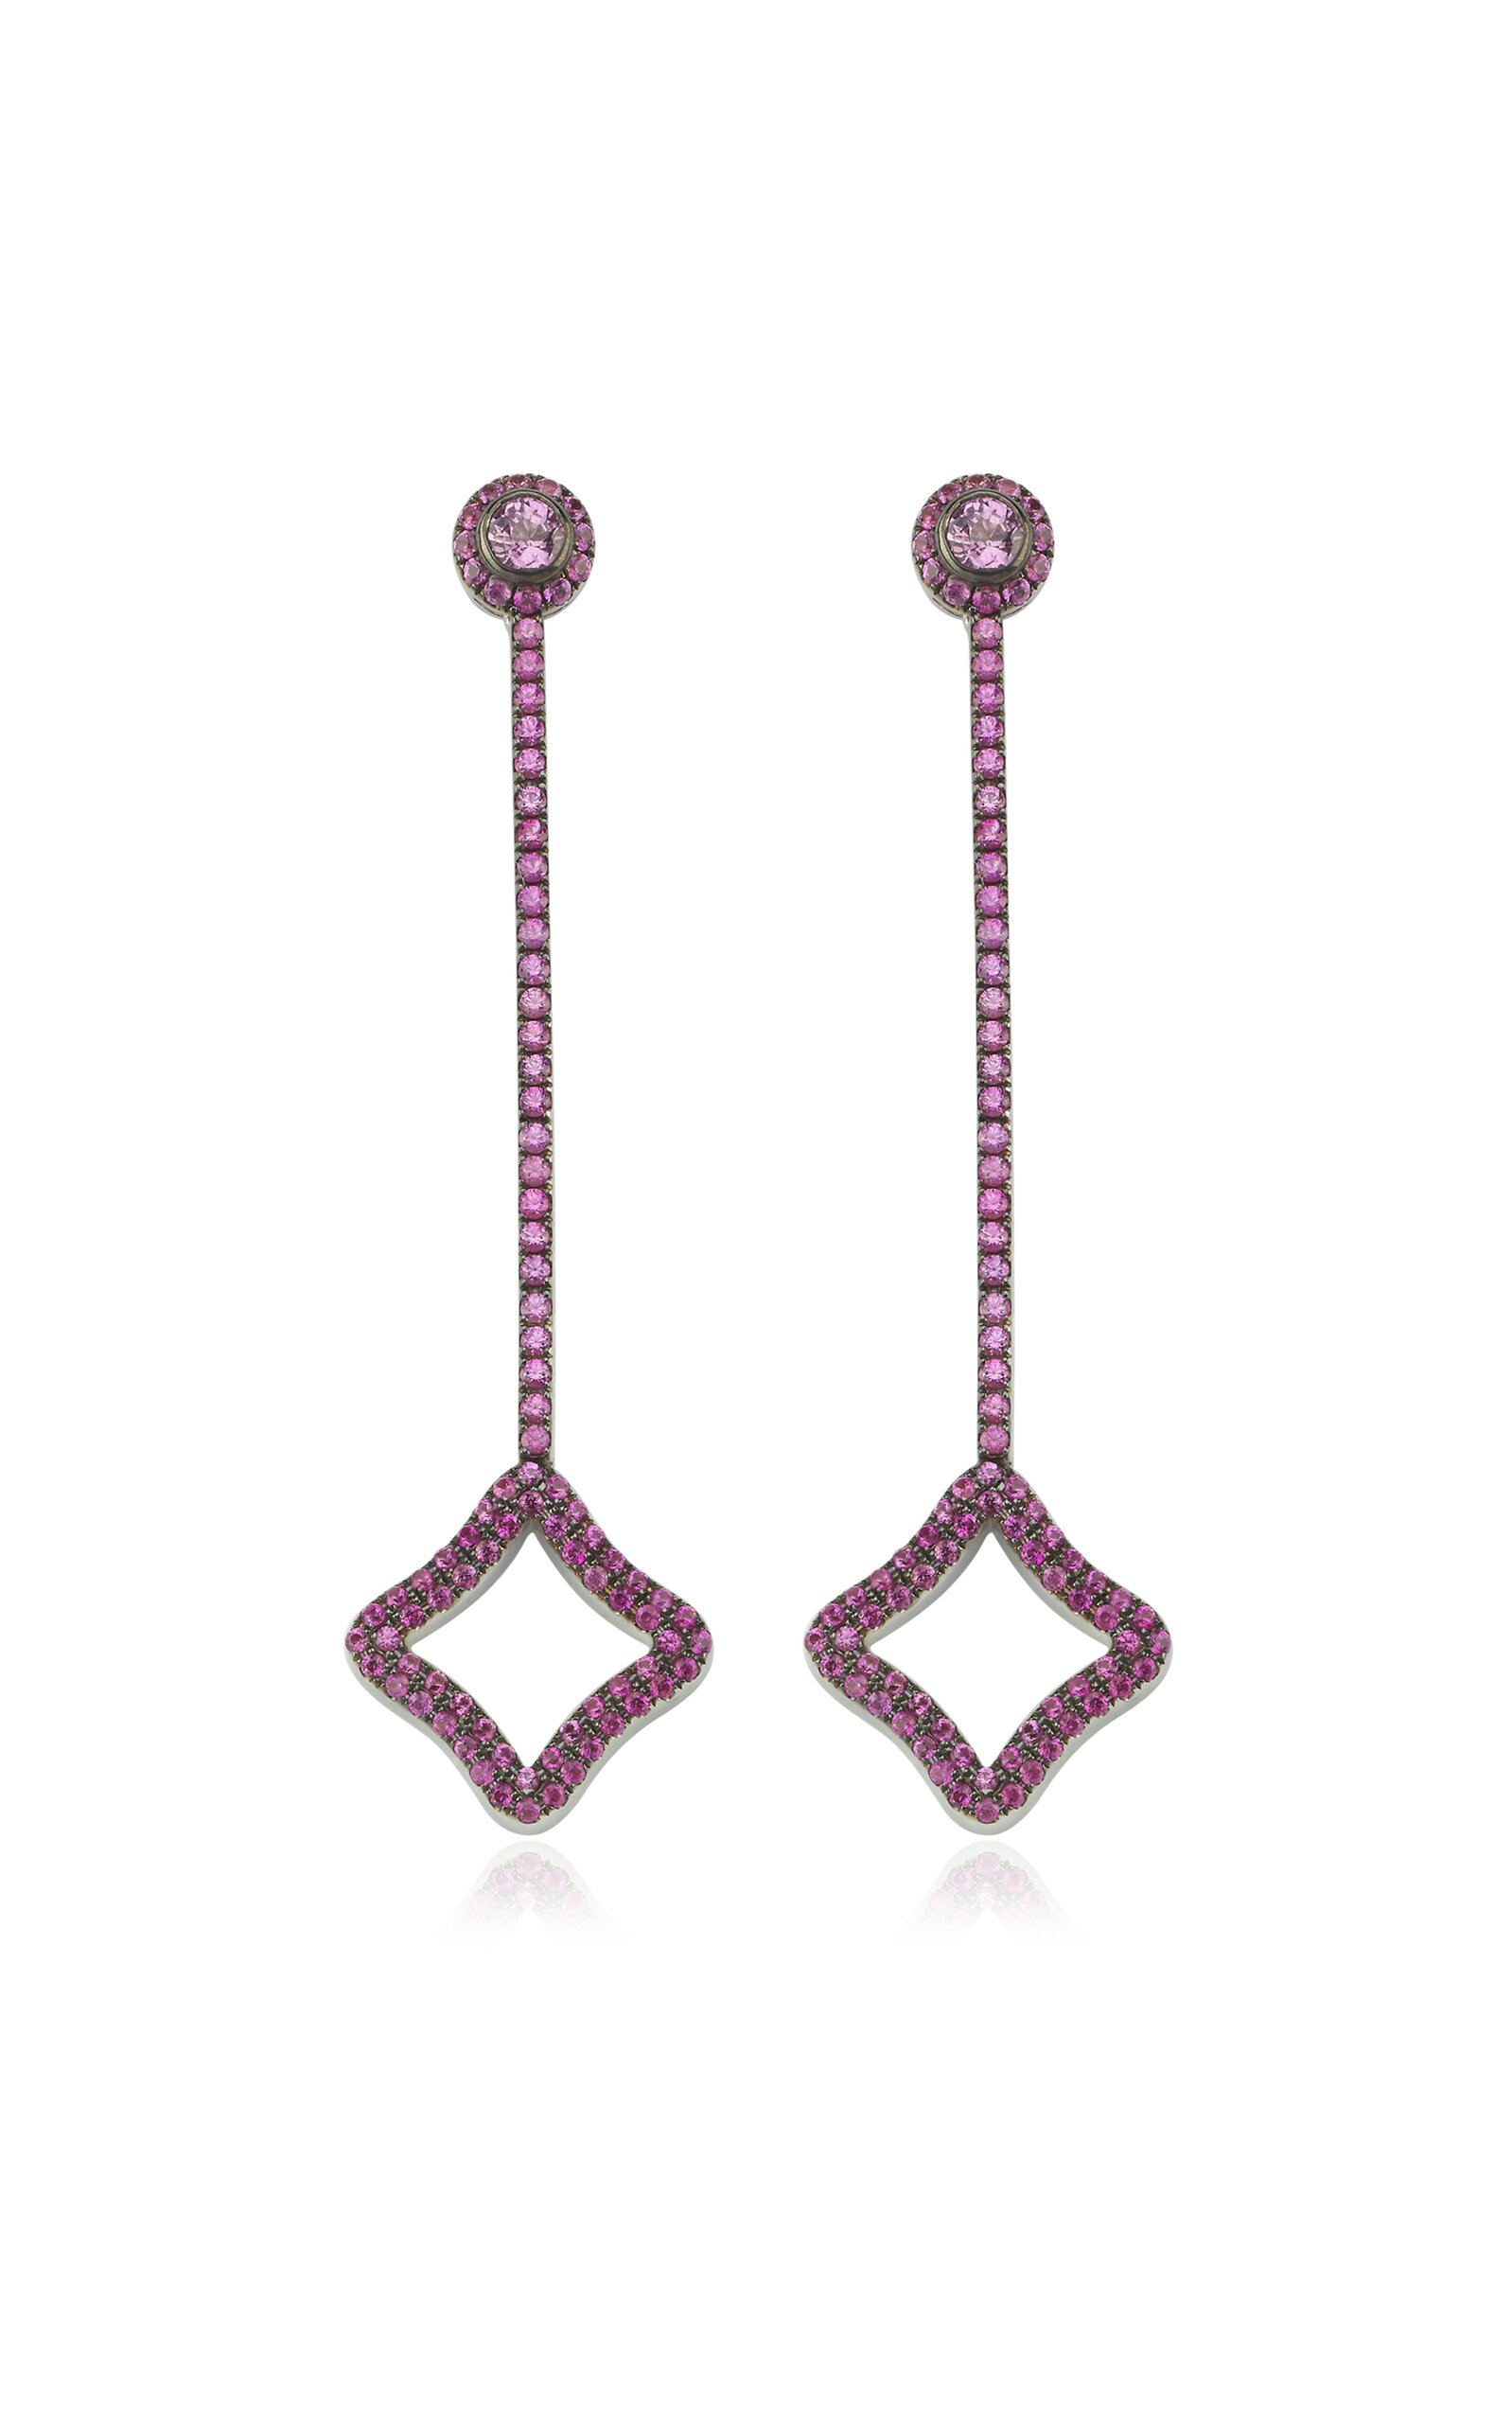 Danielle Marks Women's 18K White Gold And Pink Sapphire Allure Drop Earrings